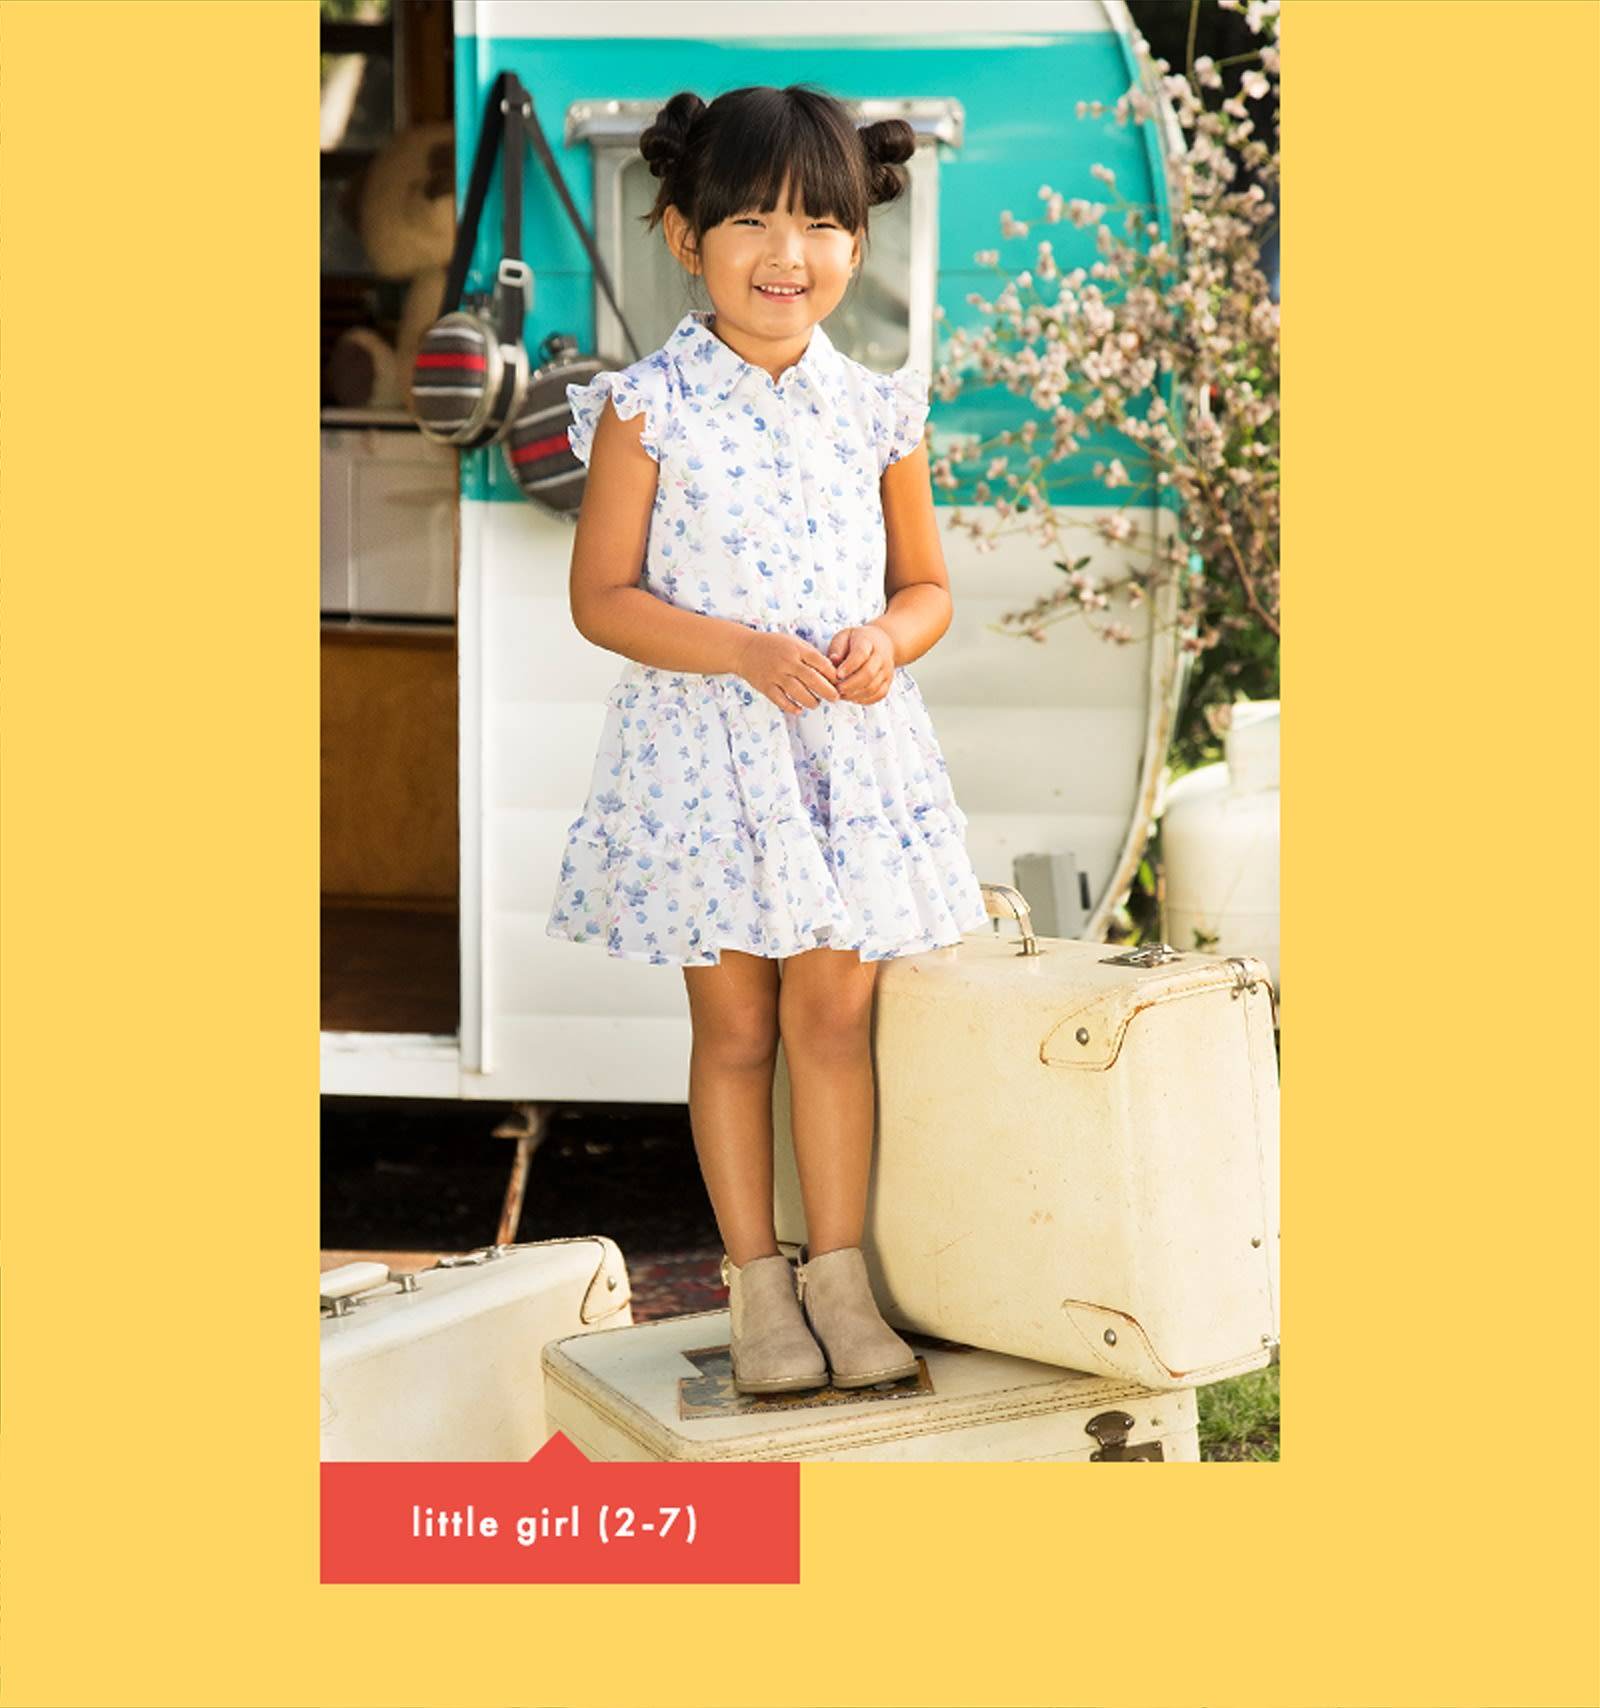 an image of a little girl wearing asundress smiling while outside